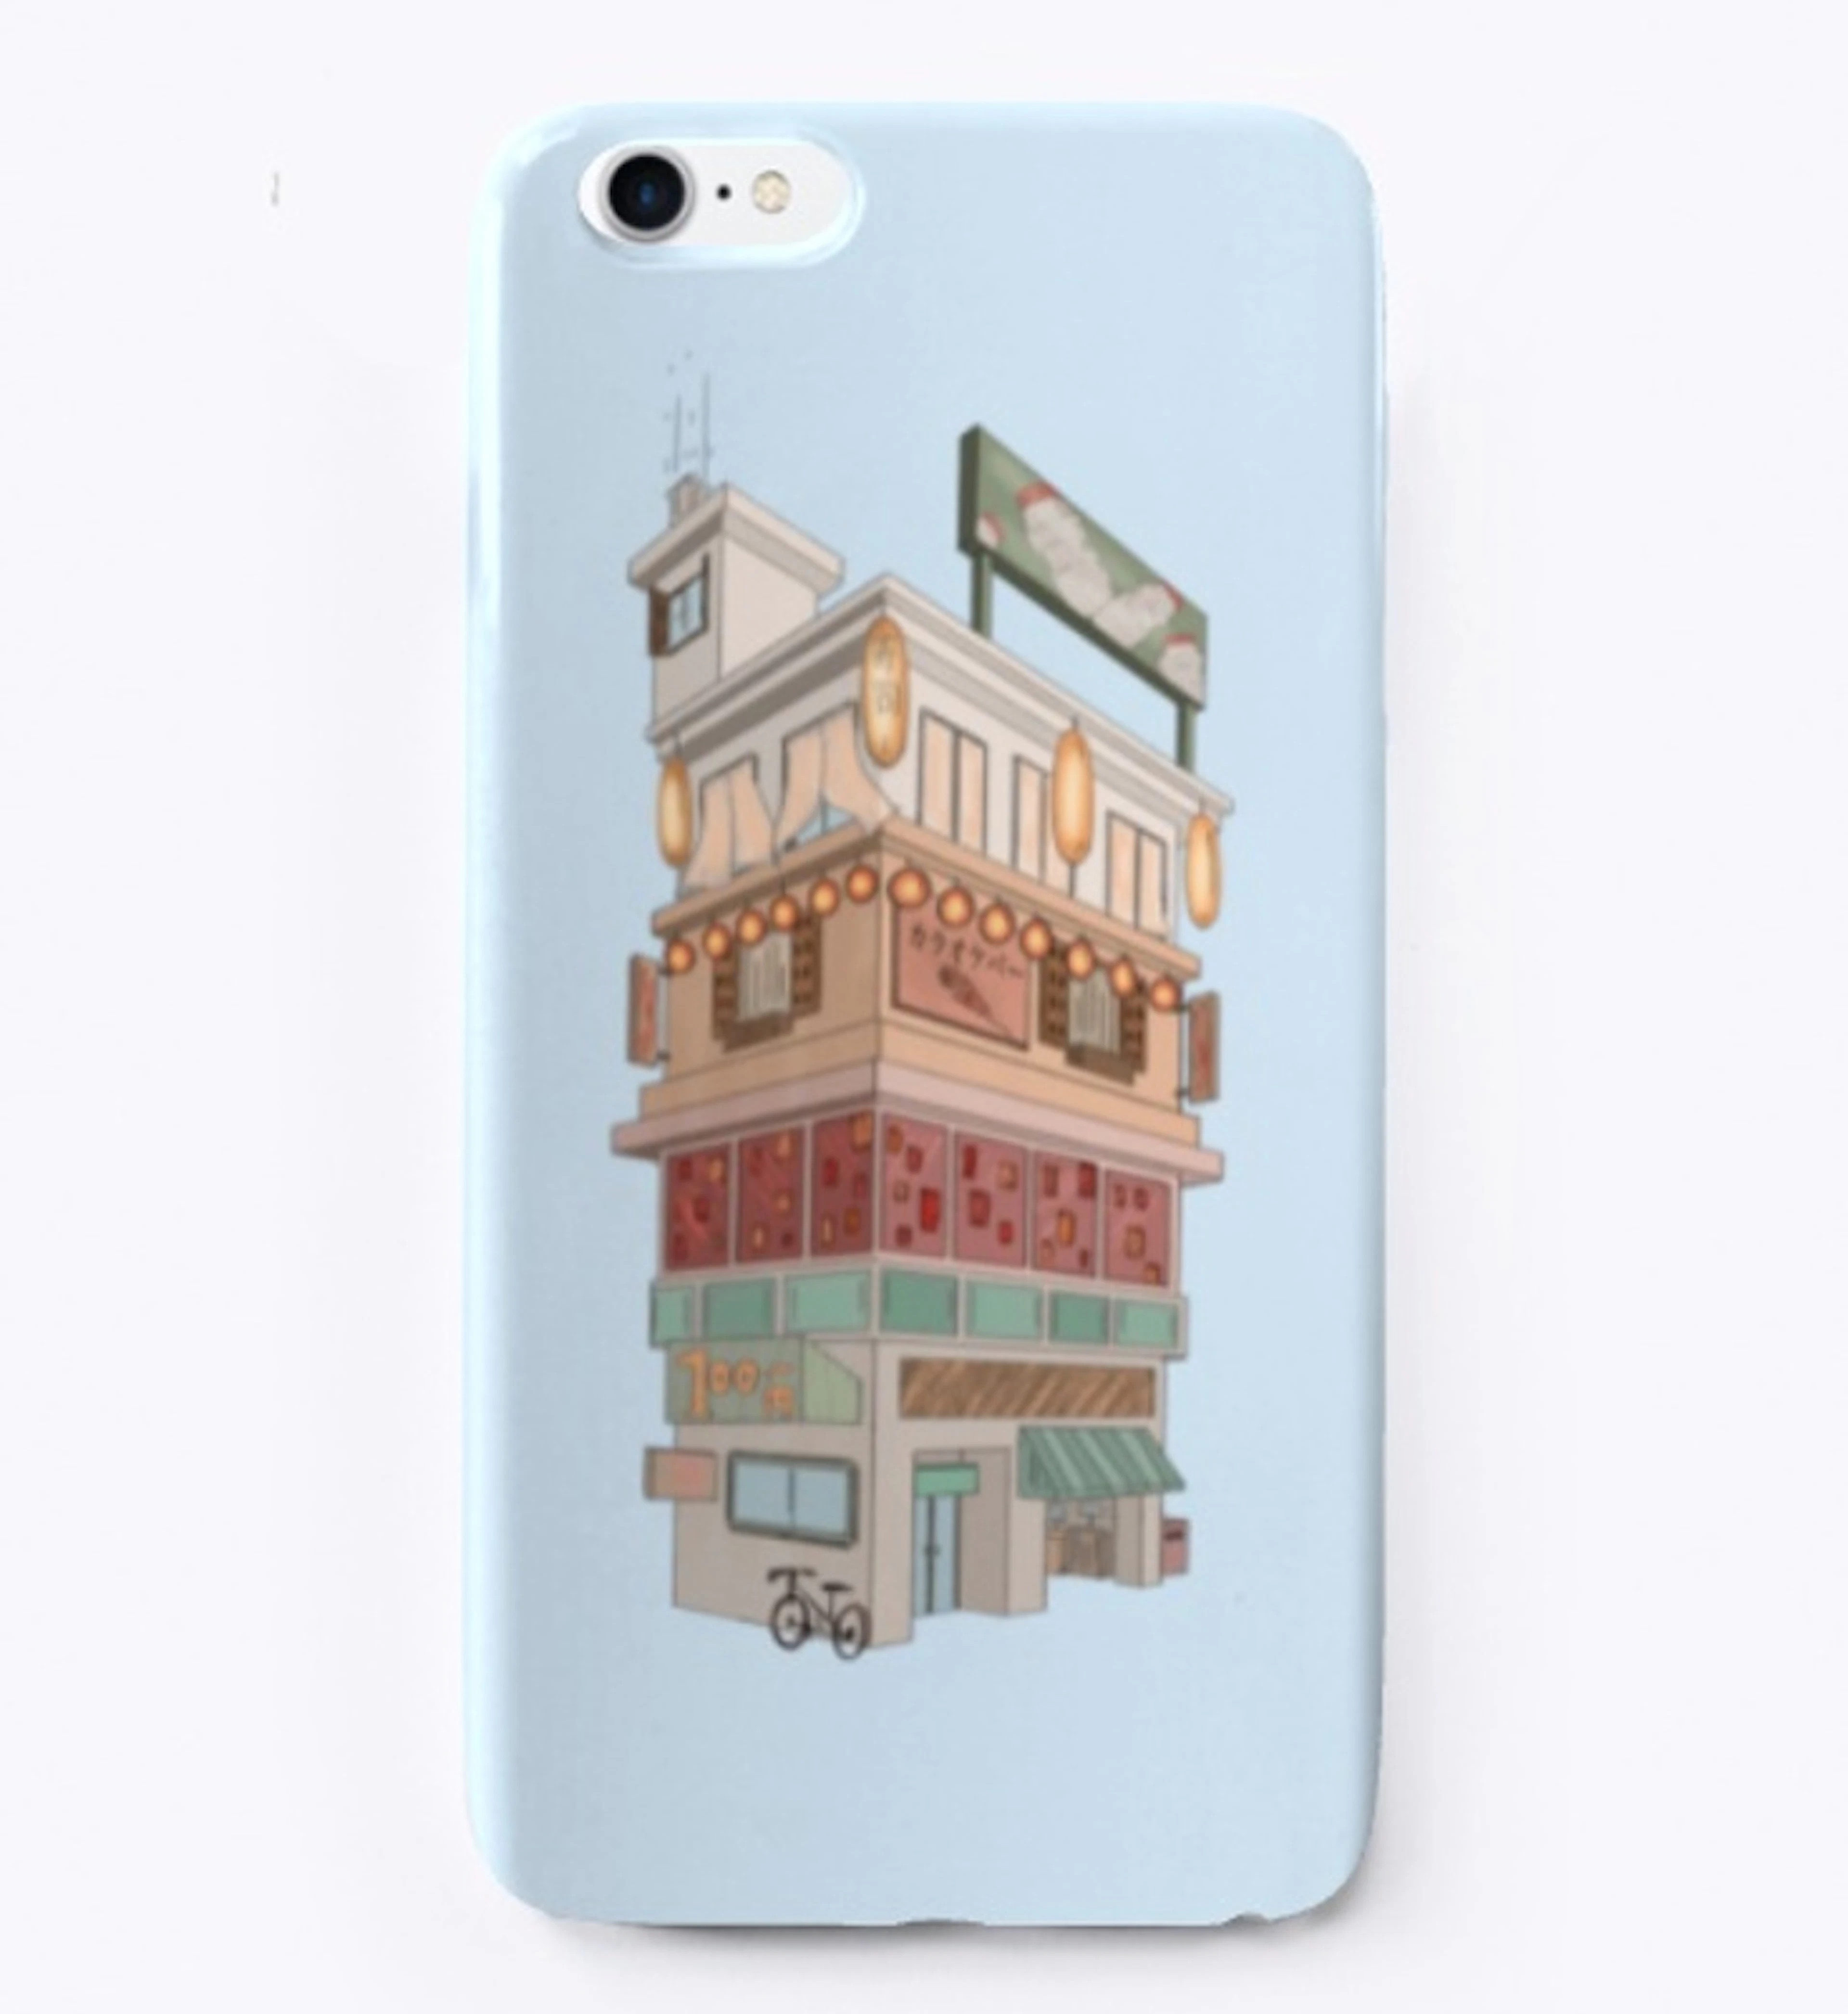 CONTROVERSIAL JAPAN iphone case